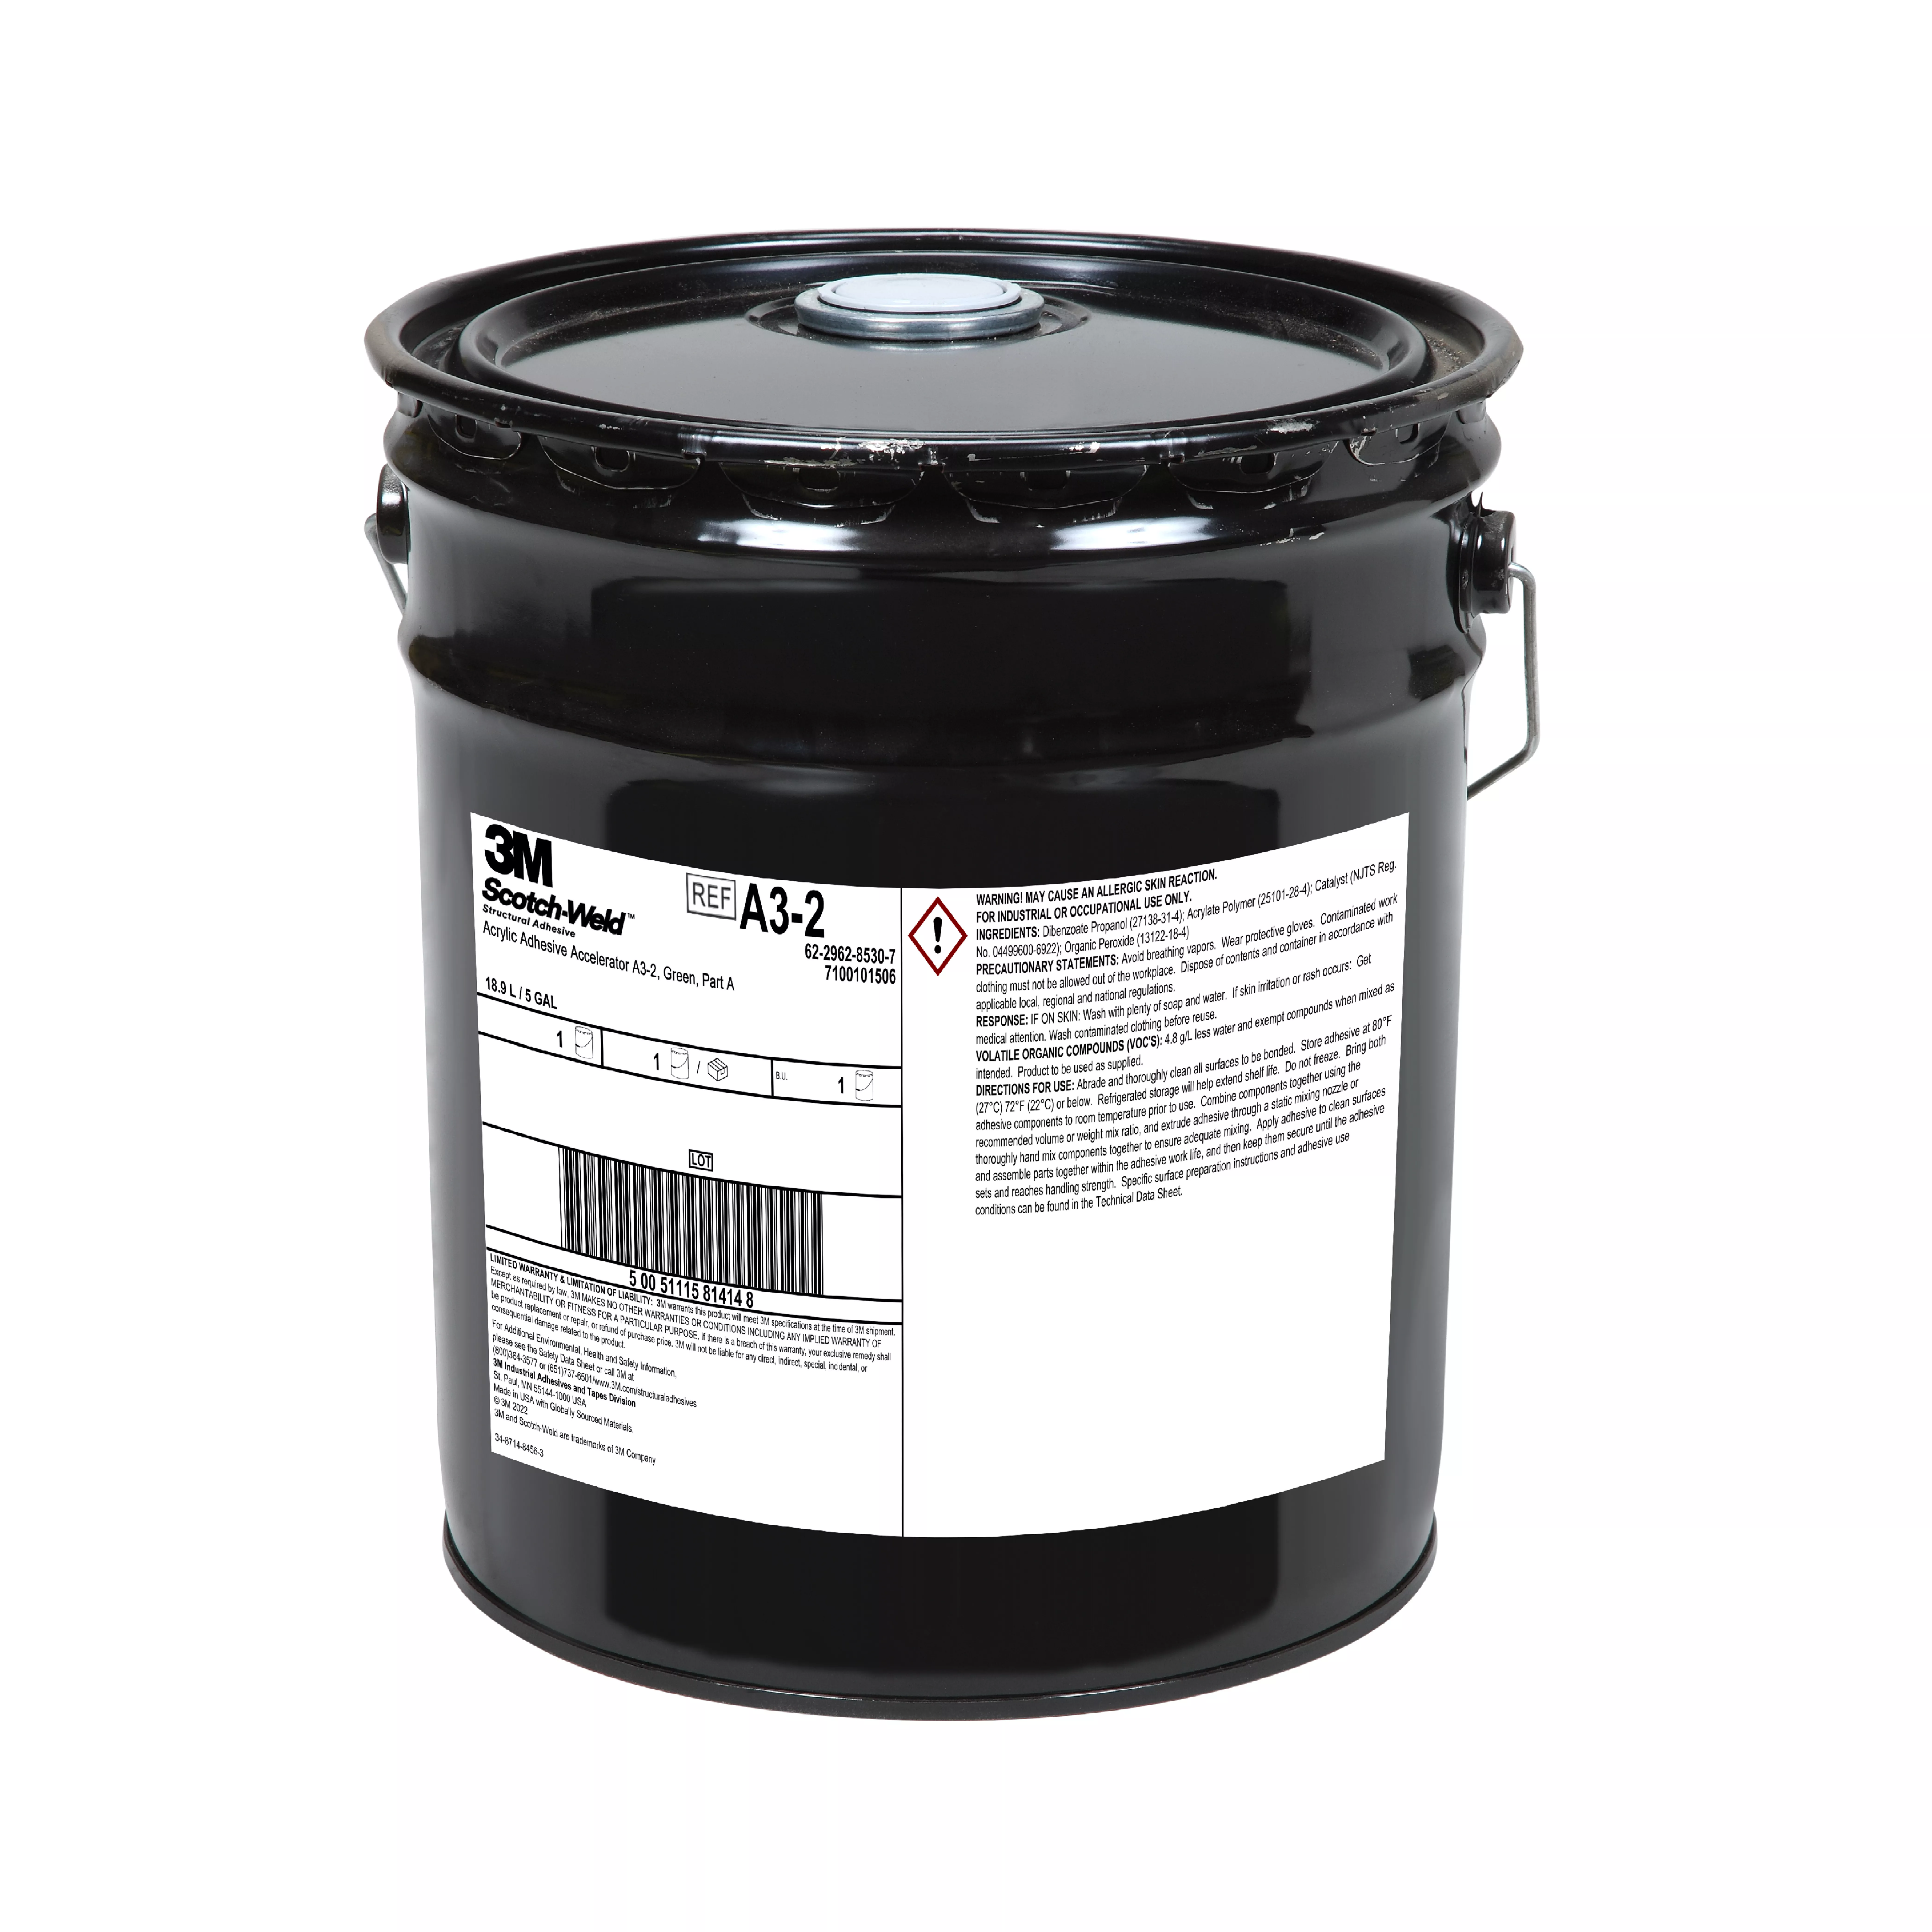 3M™ Scotch-Weld™ Acrylic Adhesive Accelerator A3-2, Green, Part A, 5
Gallon (Pail), 1 Can/Drum